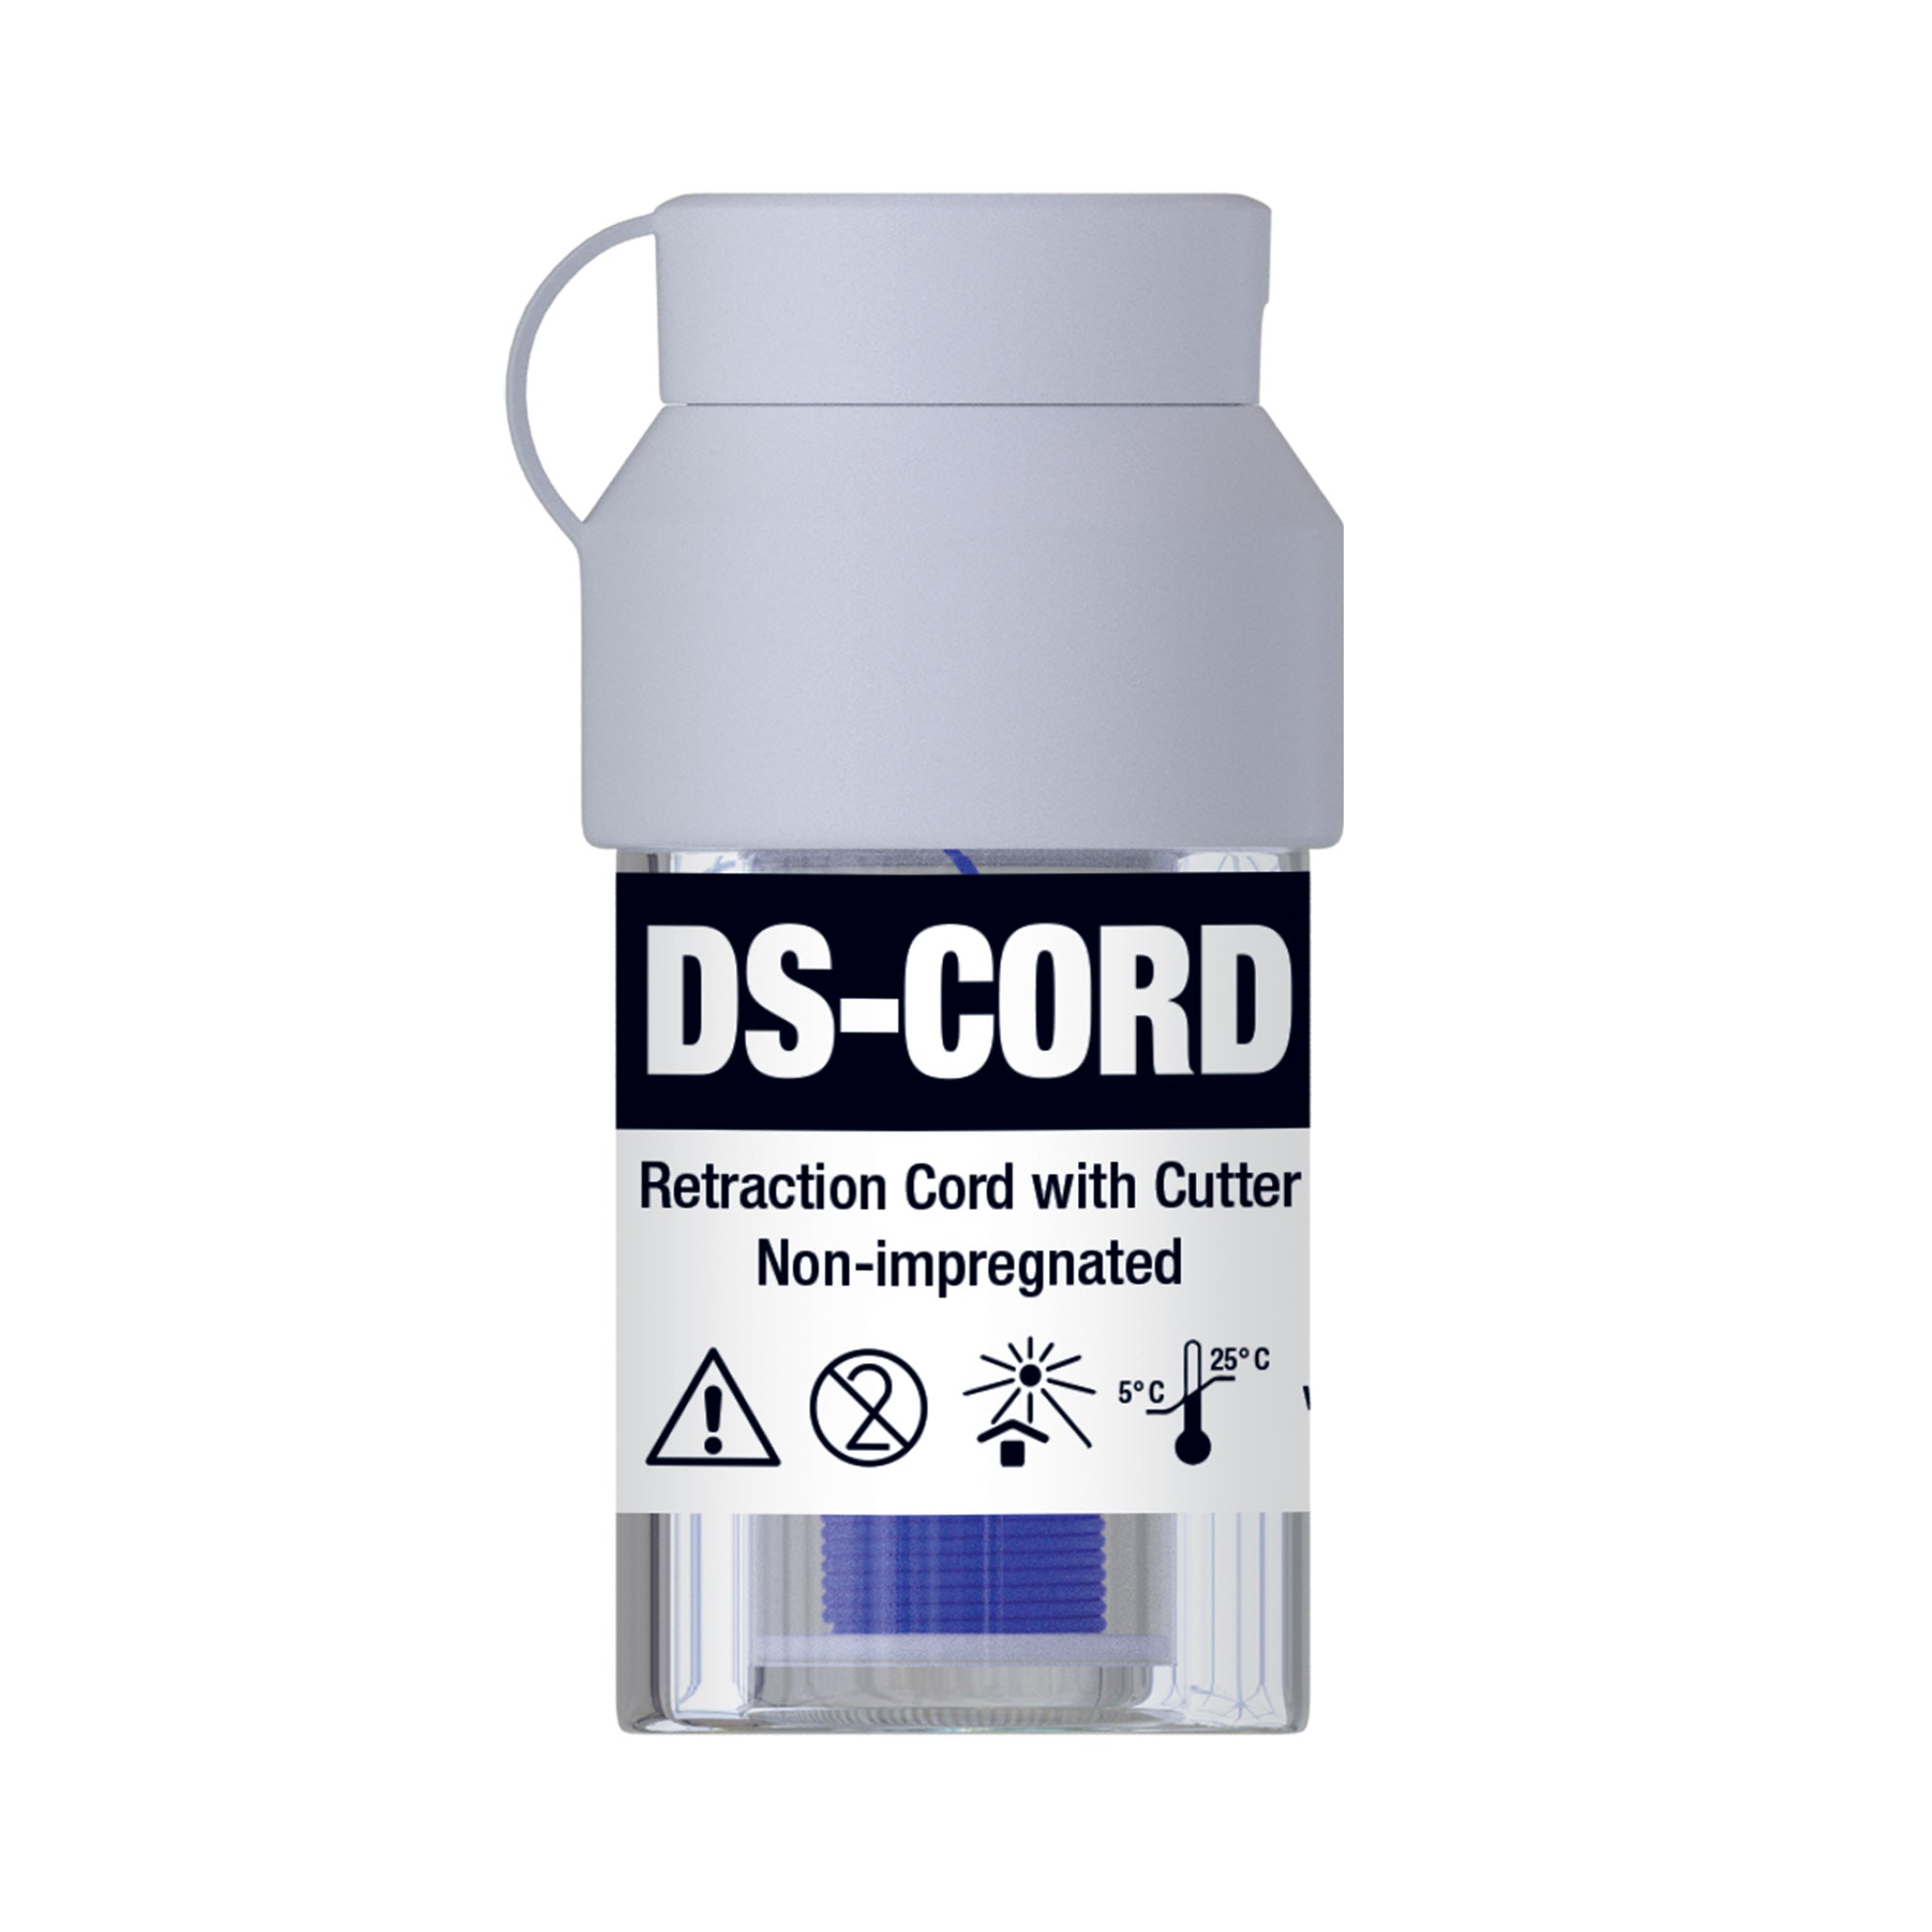 DSI DS-Cord Retraction Cord "Natural" Without Additives 285cm